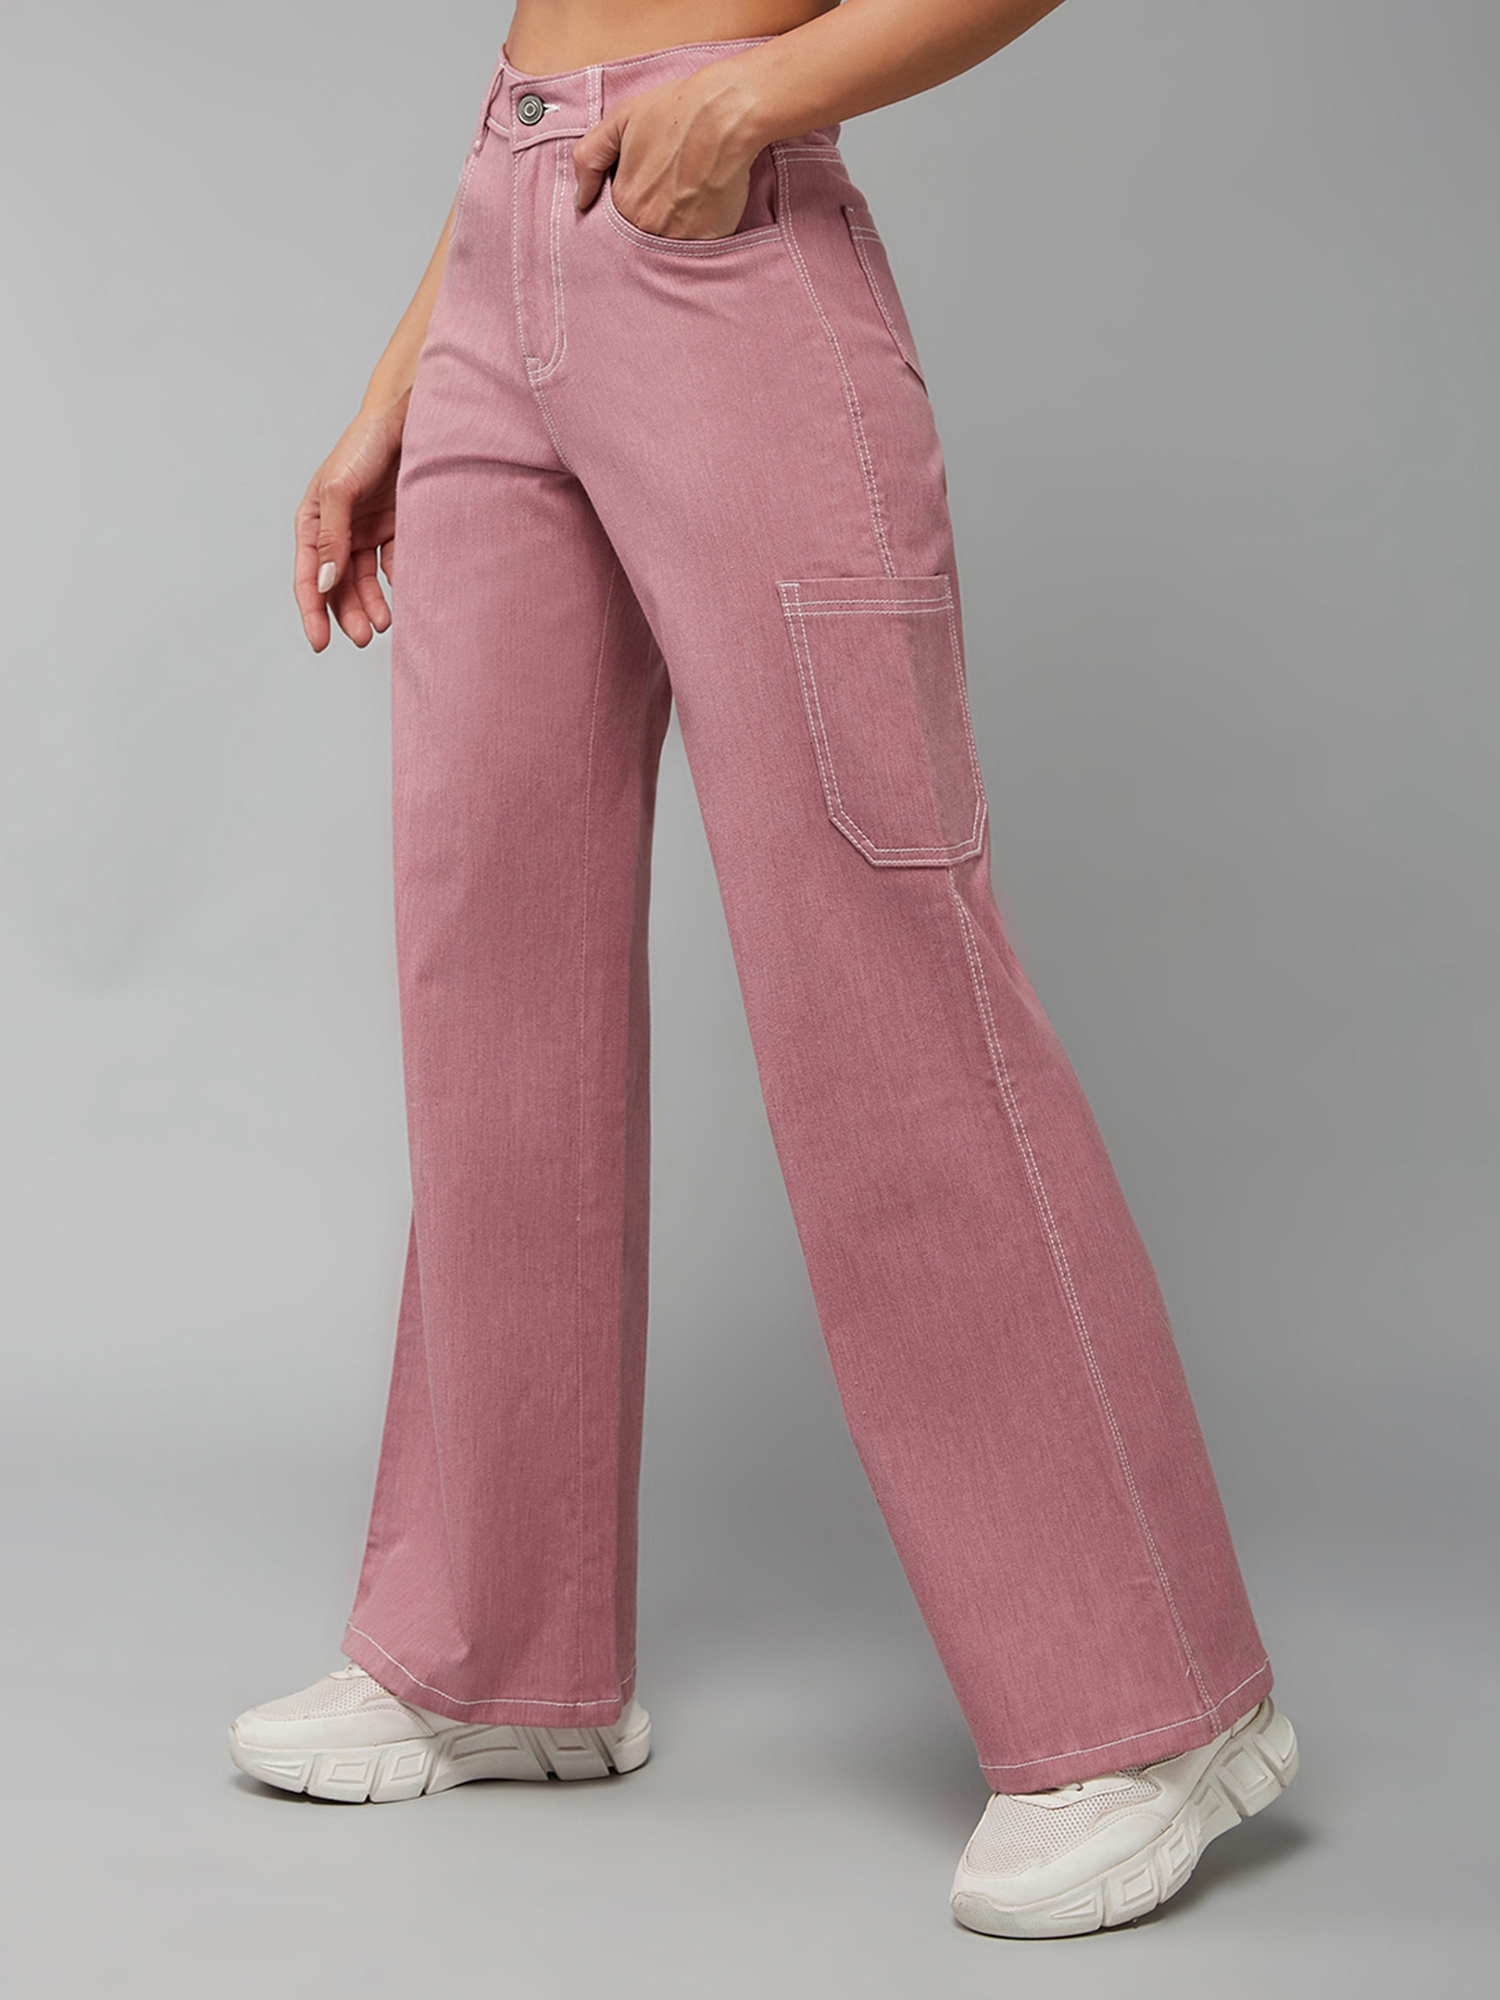 Dolce Crudo | Women's Dusty Pink Wide-Leg High Rise Clean Look Regular-Length Stretchable Denim Pants